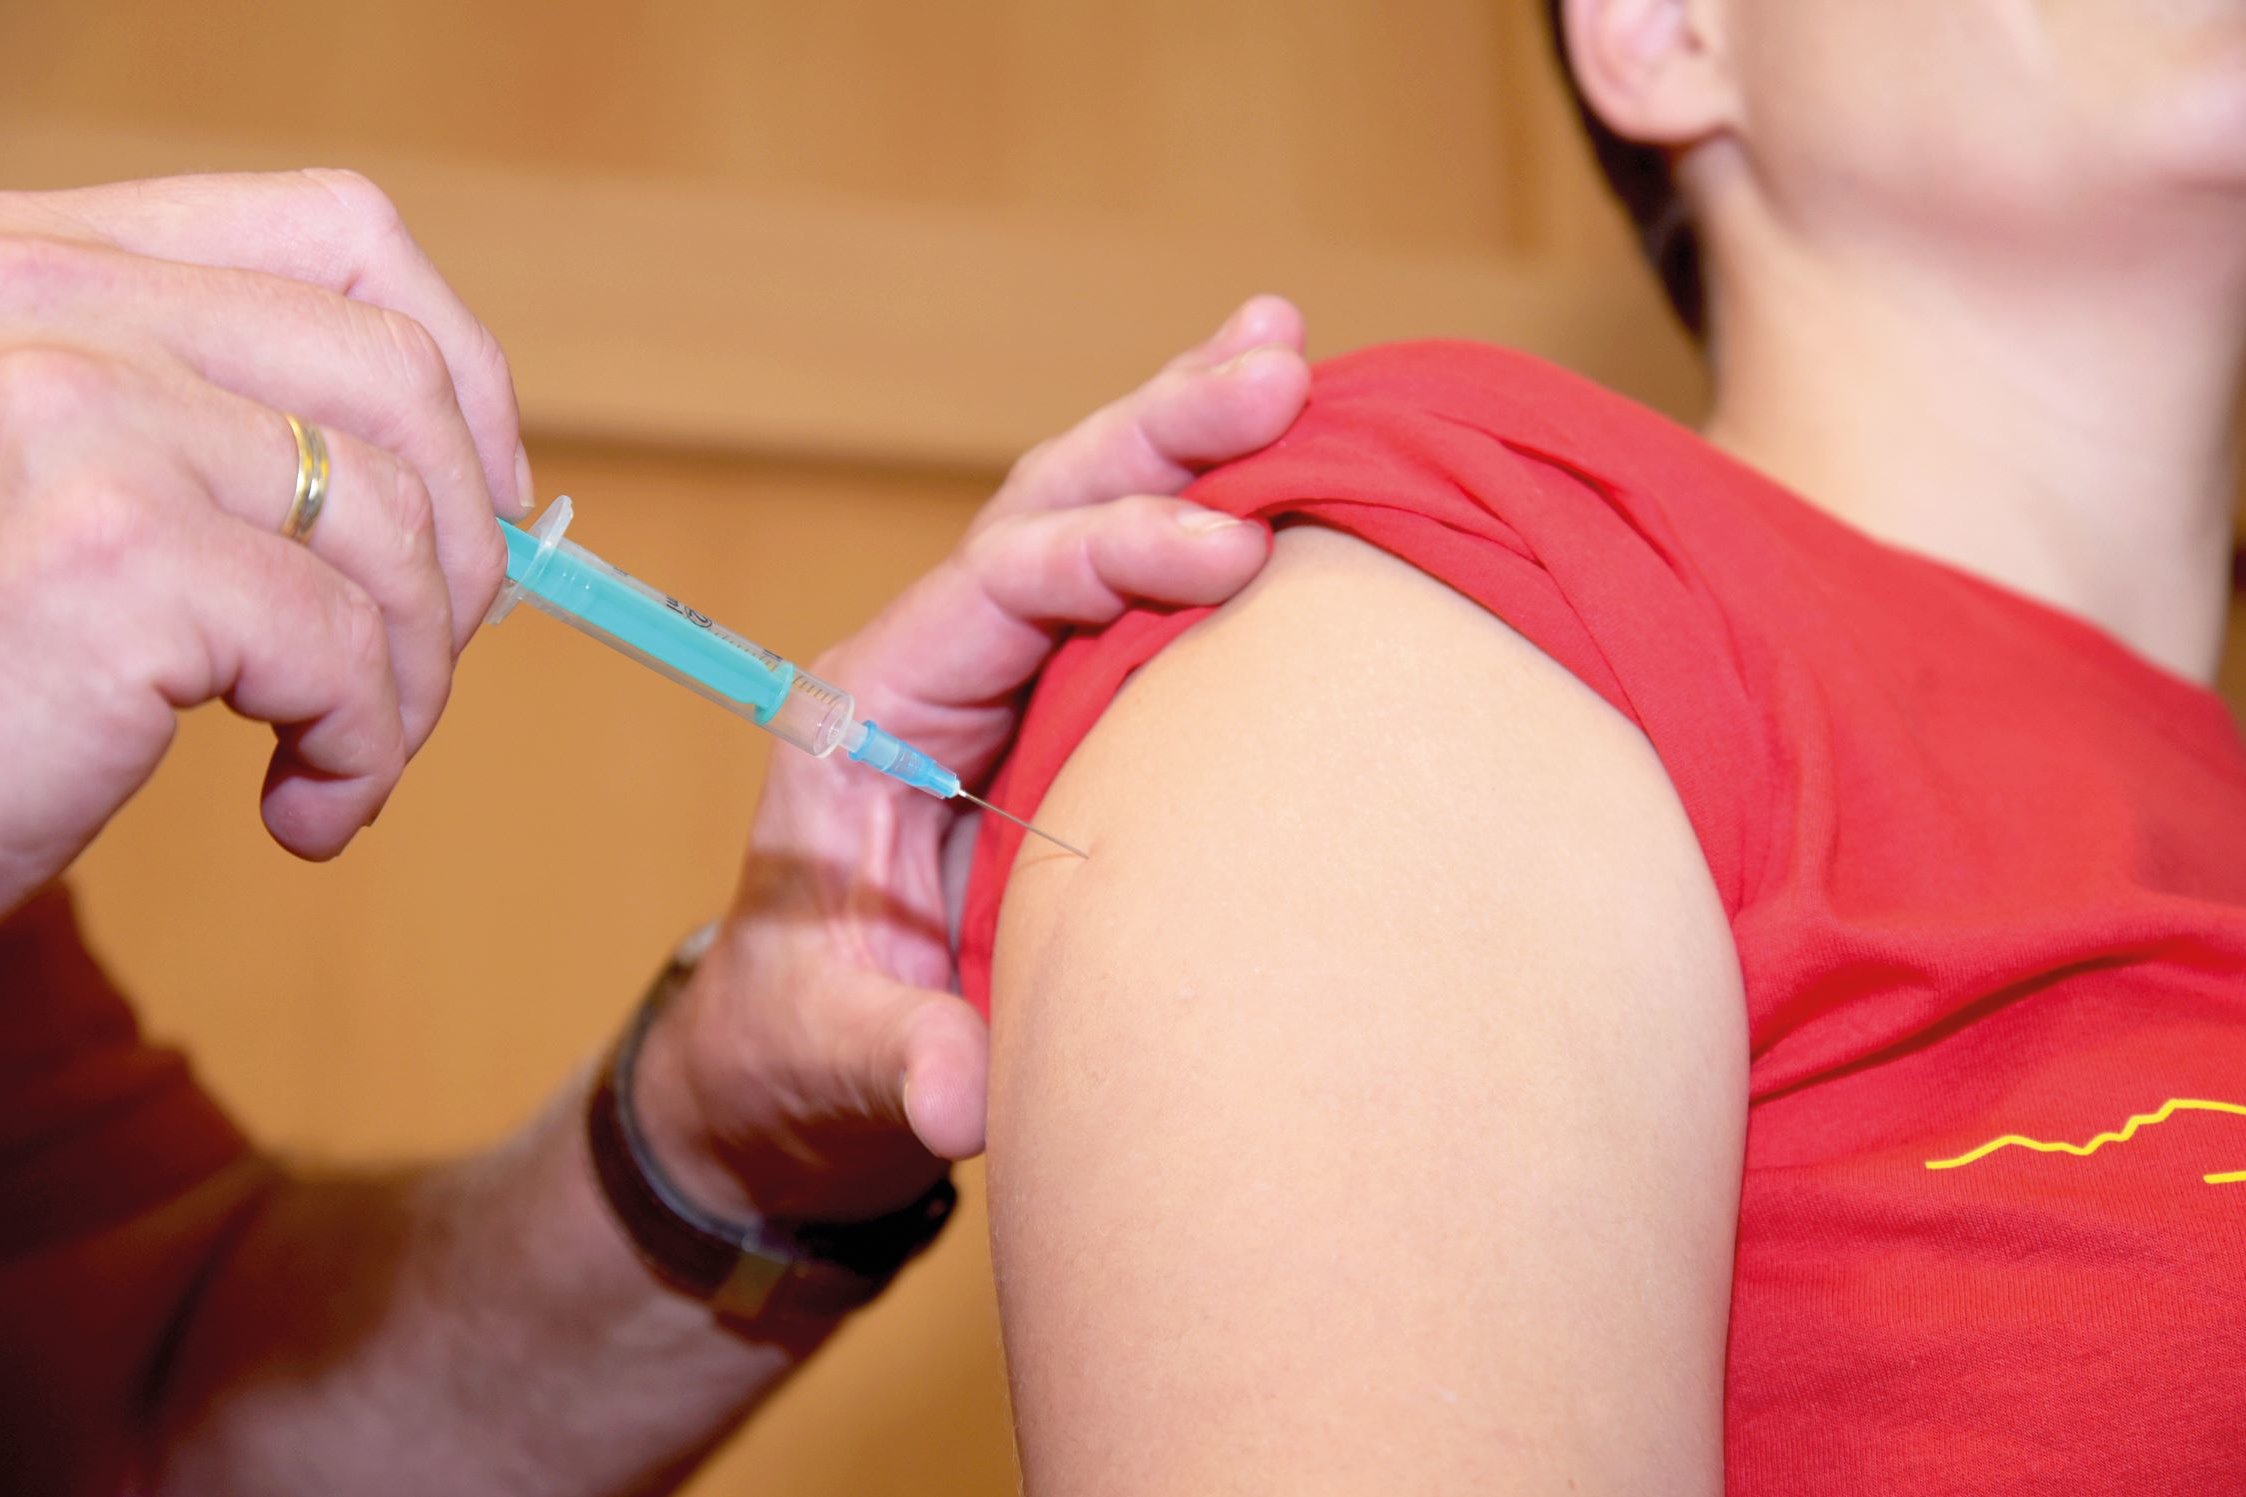 A patient is getting vaccinated